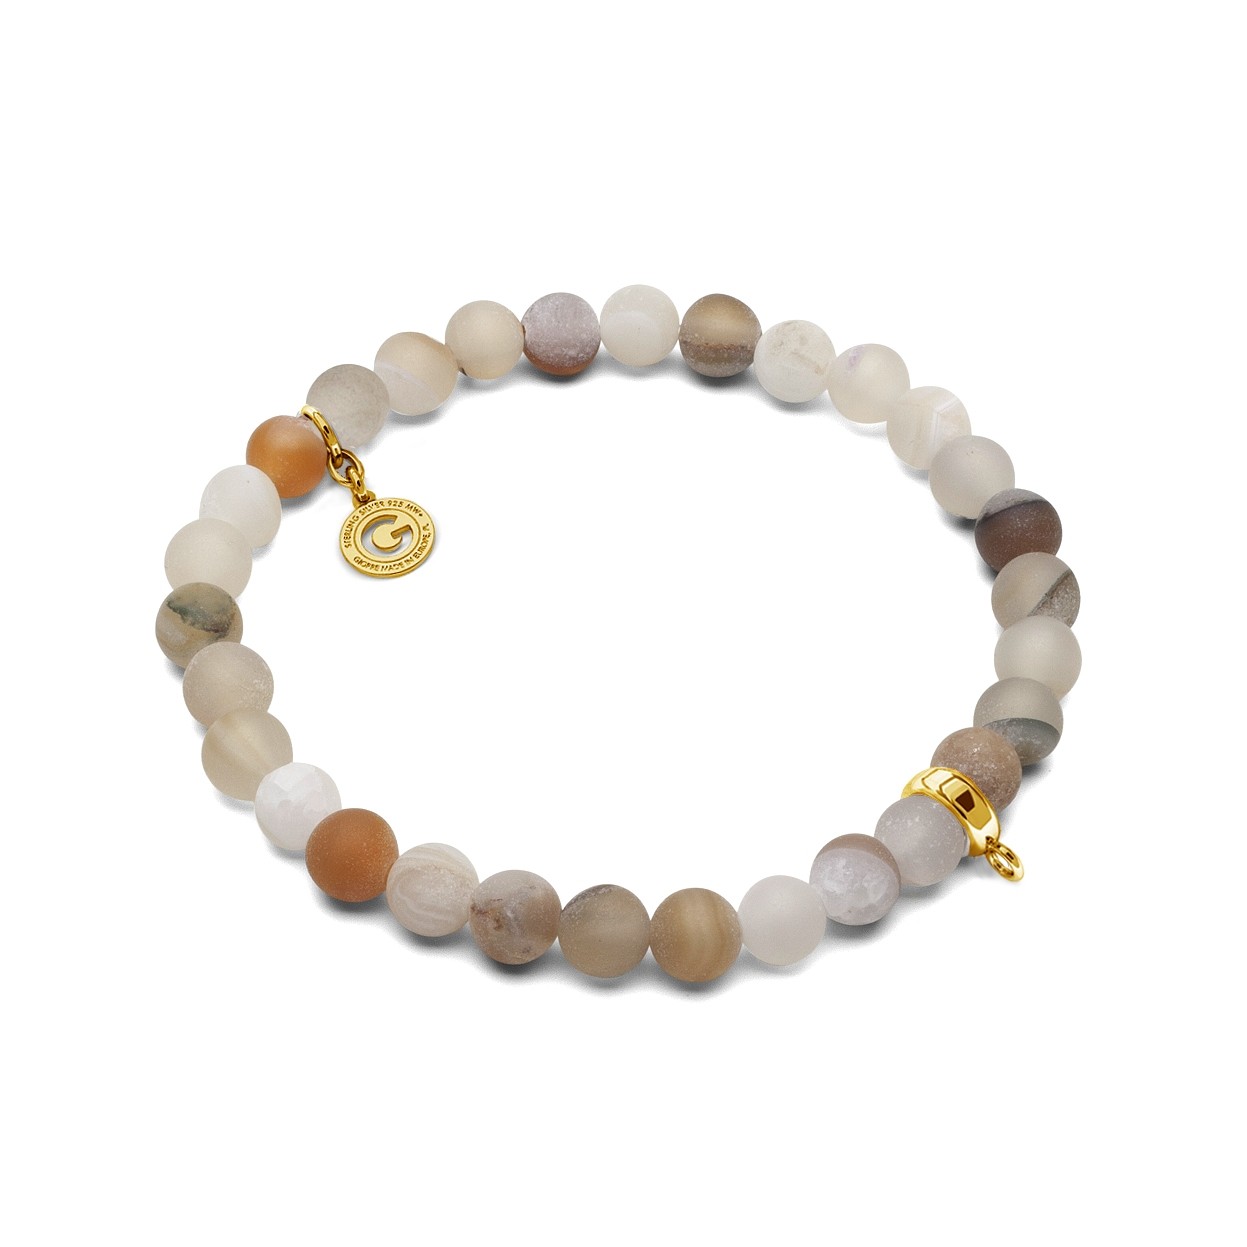 FLEXIBLE BRACELET WITH NATURAL STONES AGATE PALE